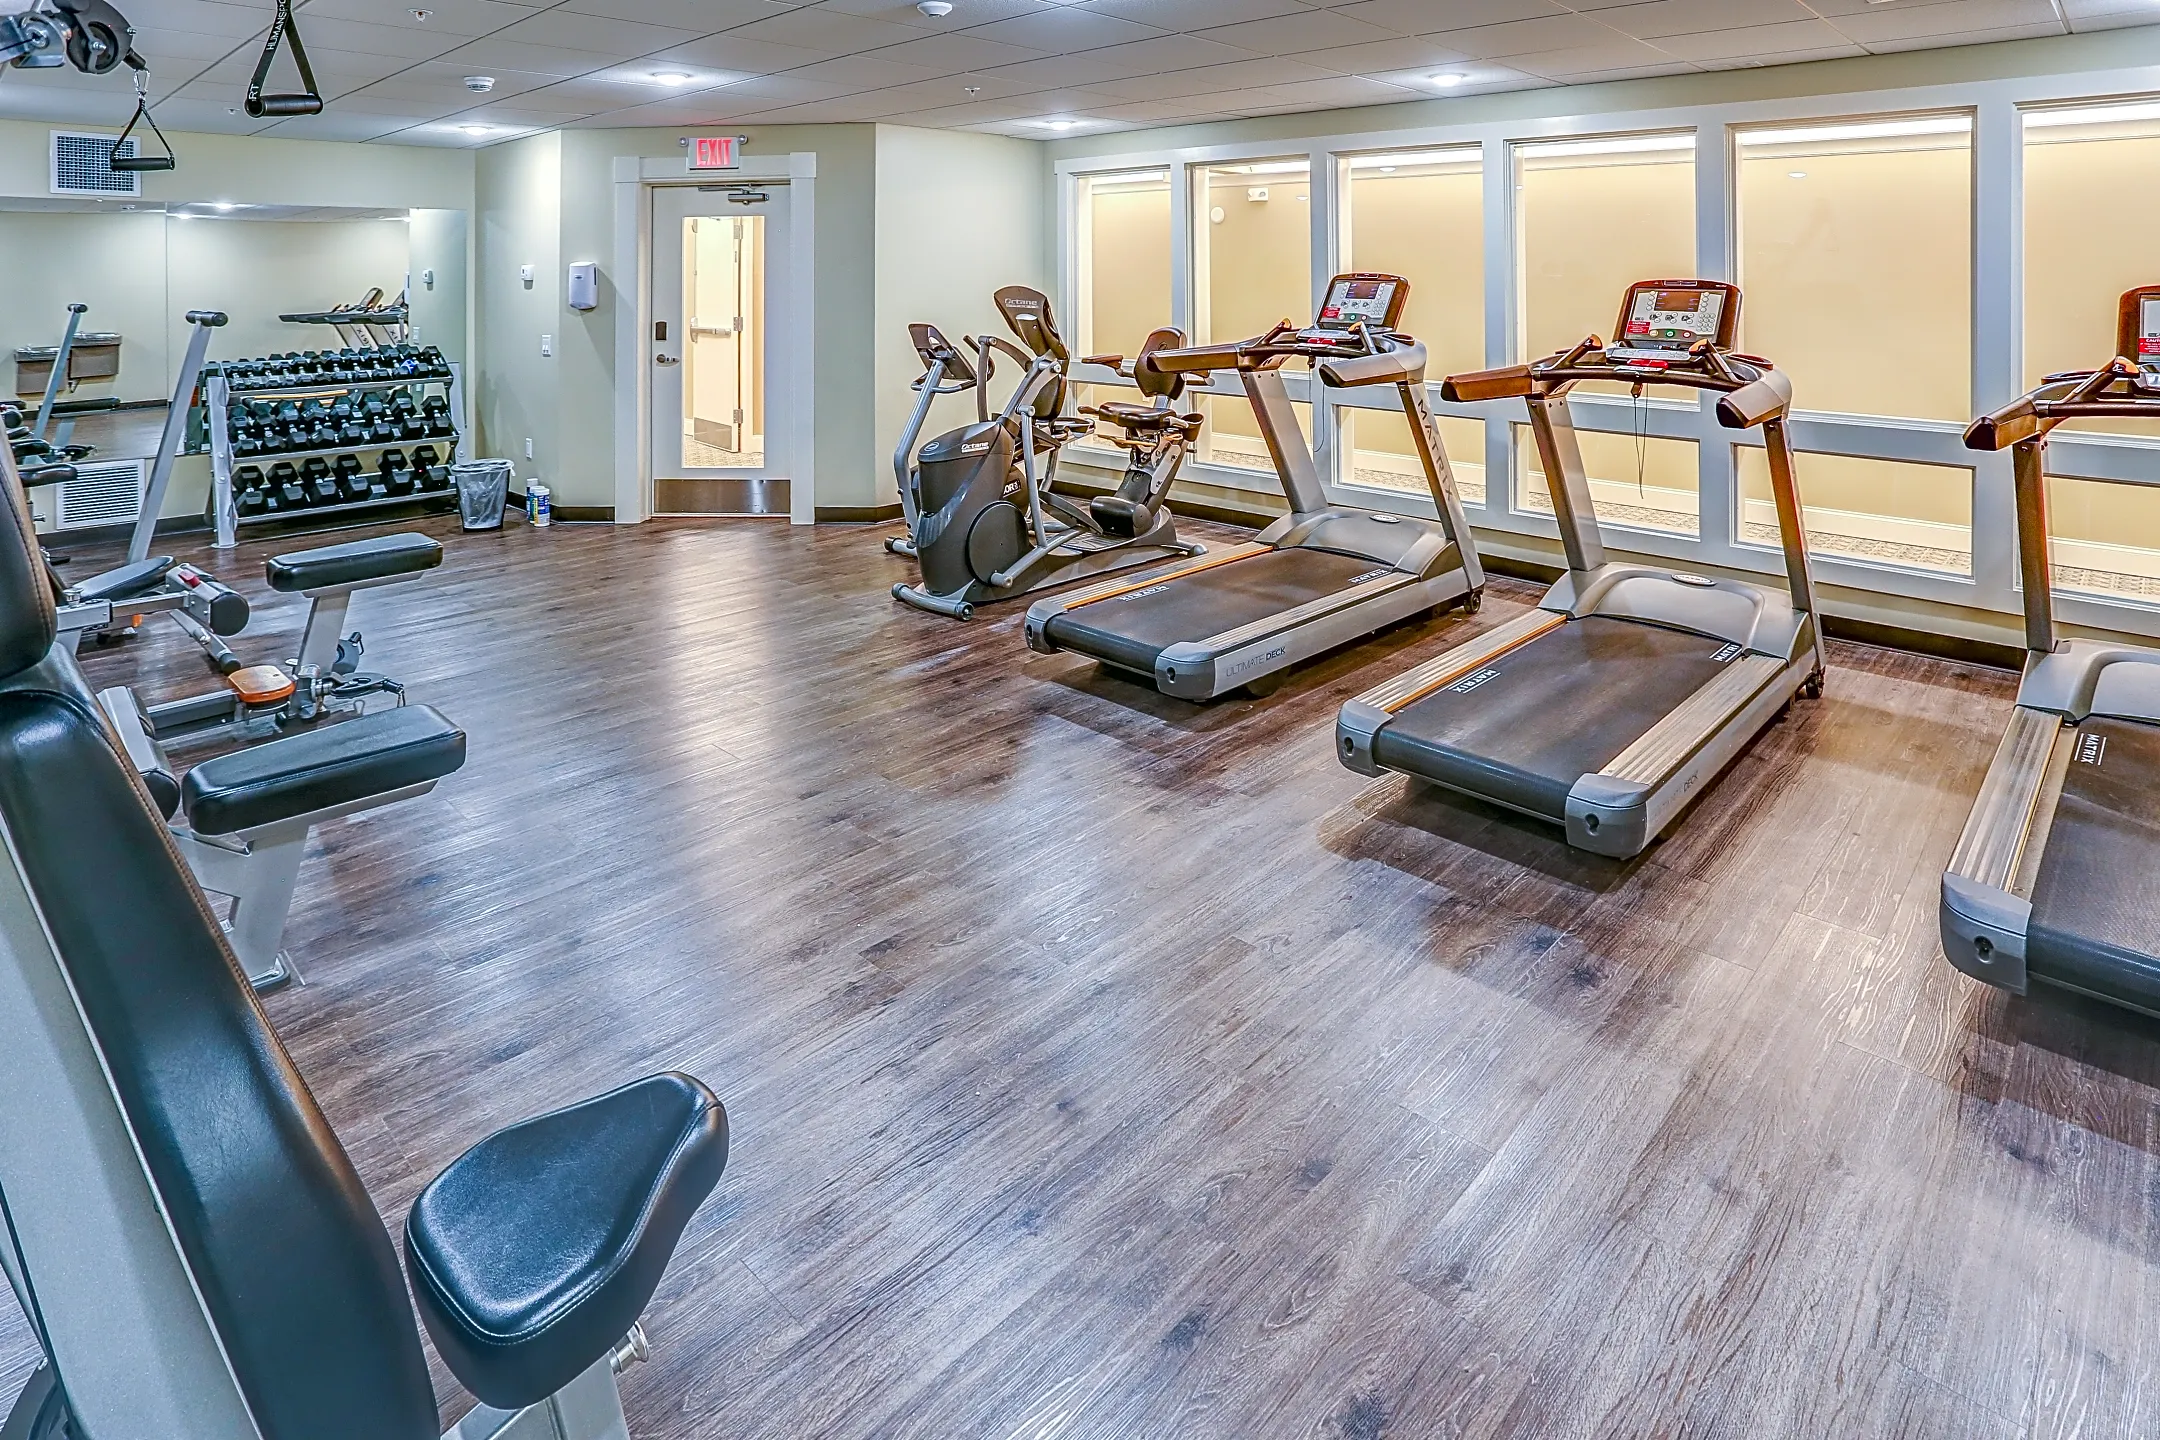 Fitness Weight Room - Chateau at Heritage Square 55+ Community - Brockport, NY